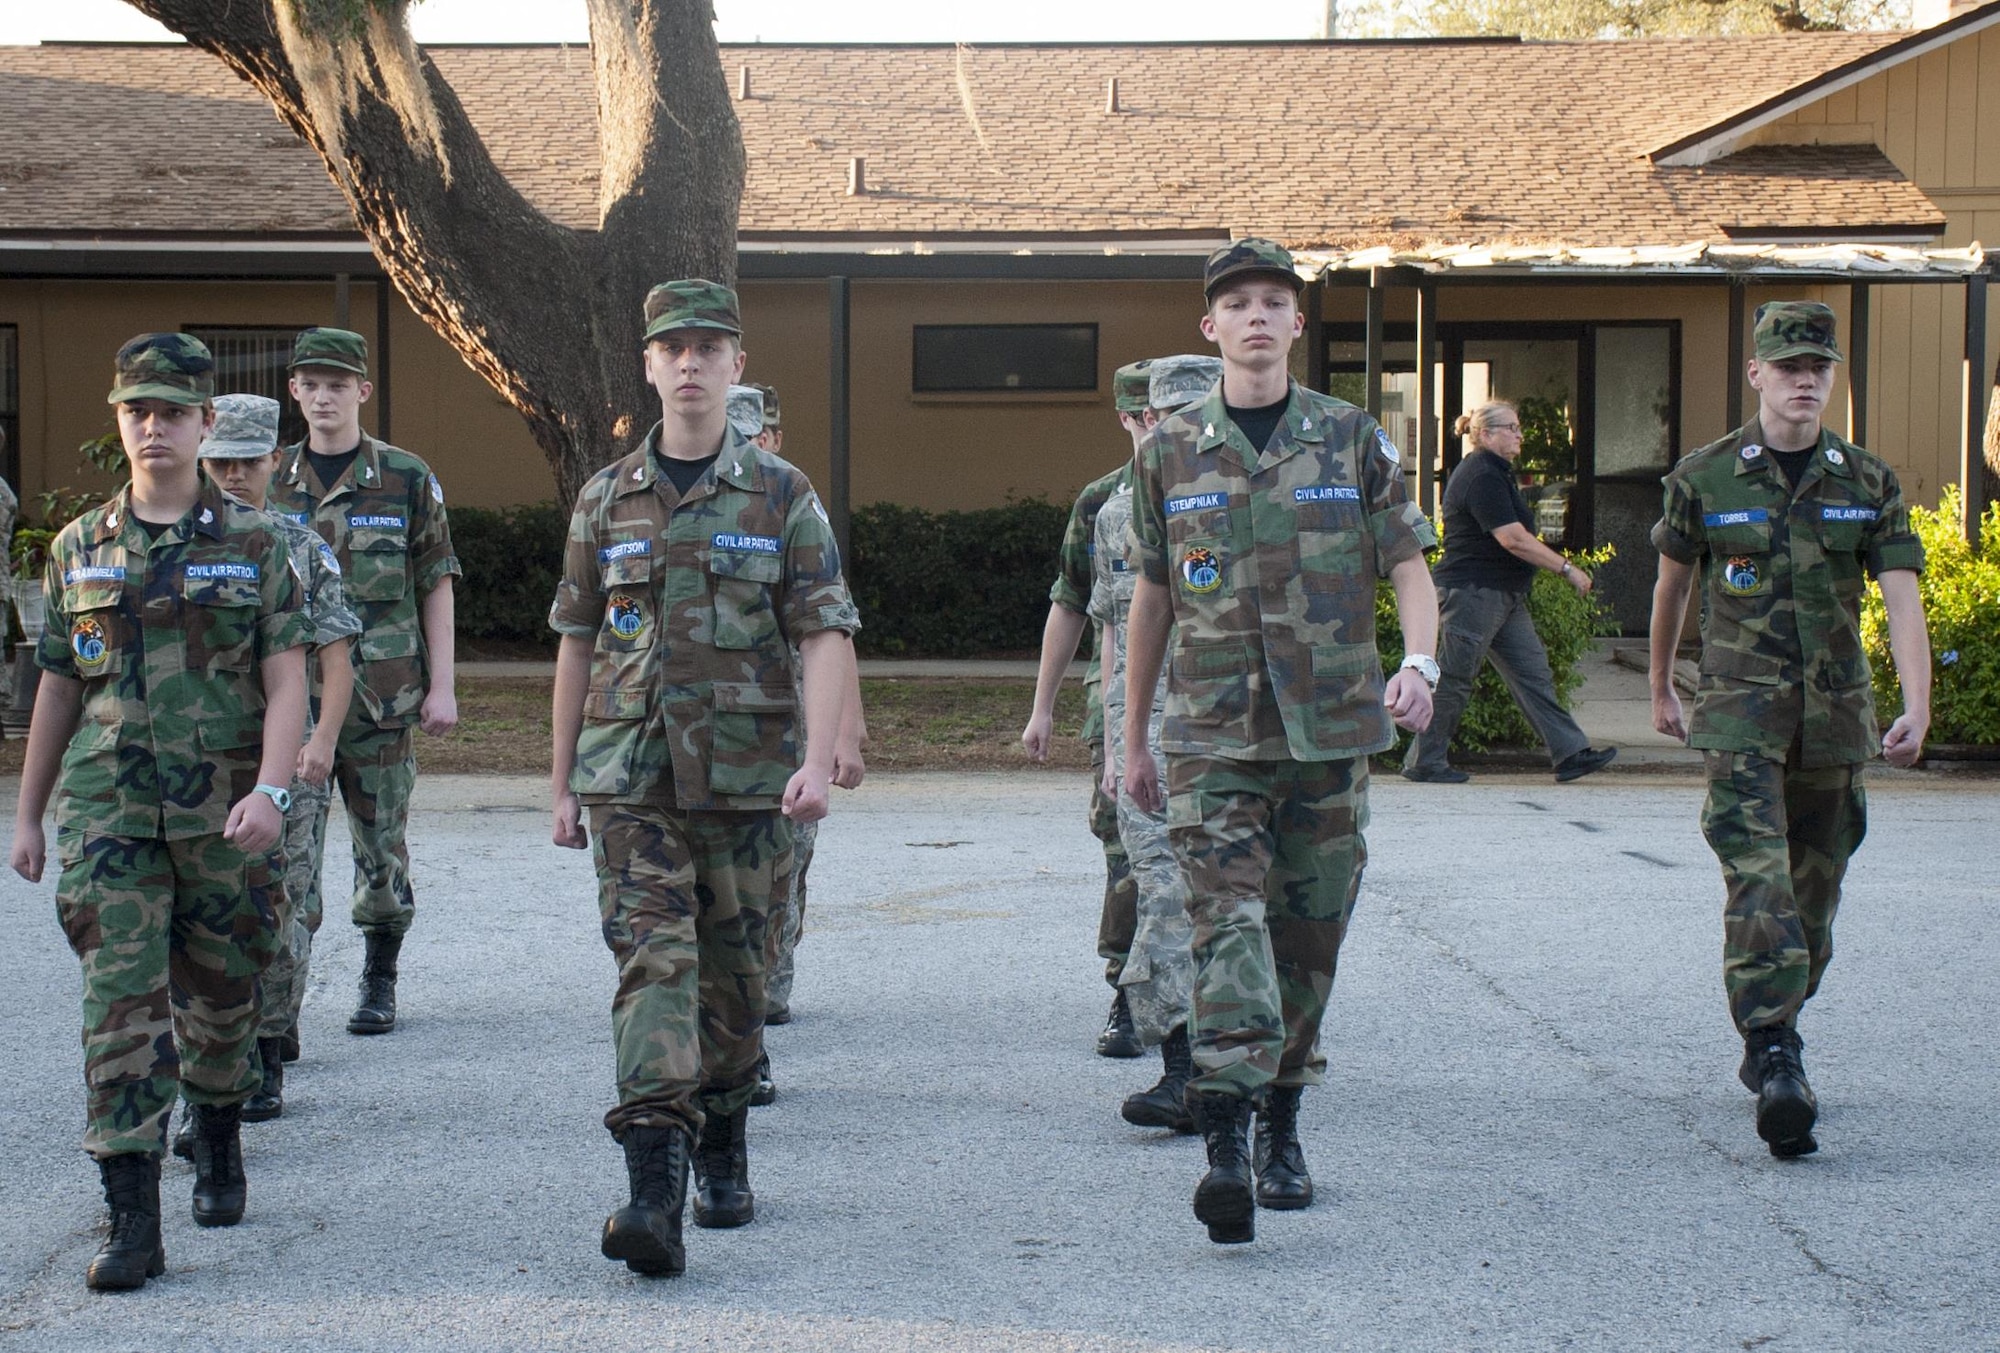 Civil Air Patrol General Chuck Yeager Cadet Squadron cadets march in formation during a practice drill session in Brandon, Fla., May 8, 2017. The General Chuck Yeager Cadet Squadron consists of 49 cadets and 20 senior members, which consists of former military, actively serving military and civilians. (U.S. Air Force by Airman 1st Class Mariette Adams)